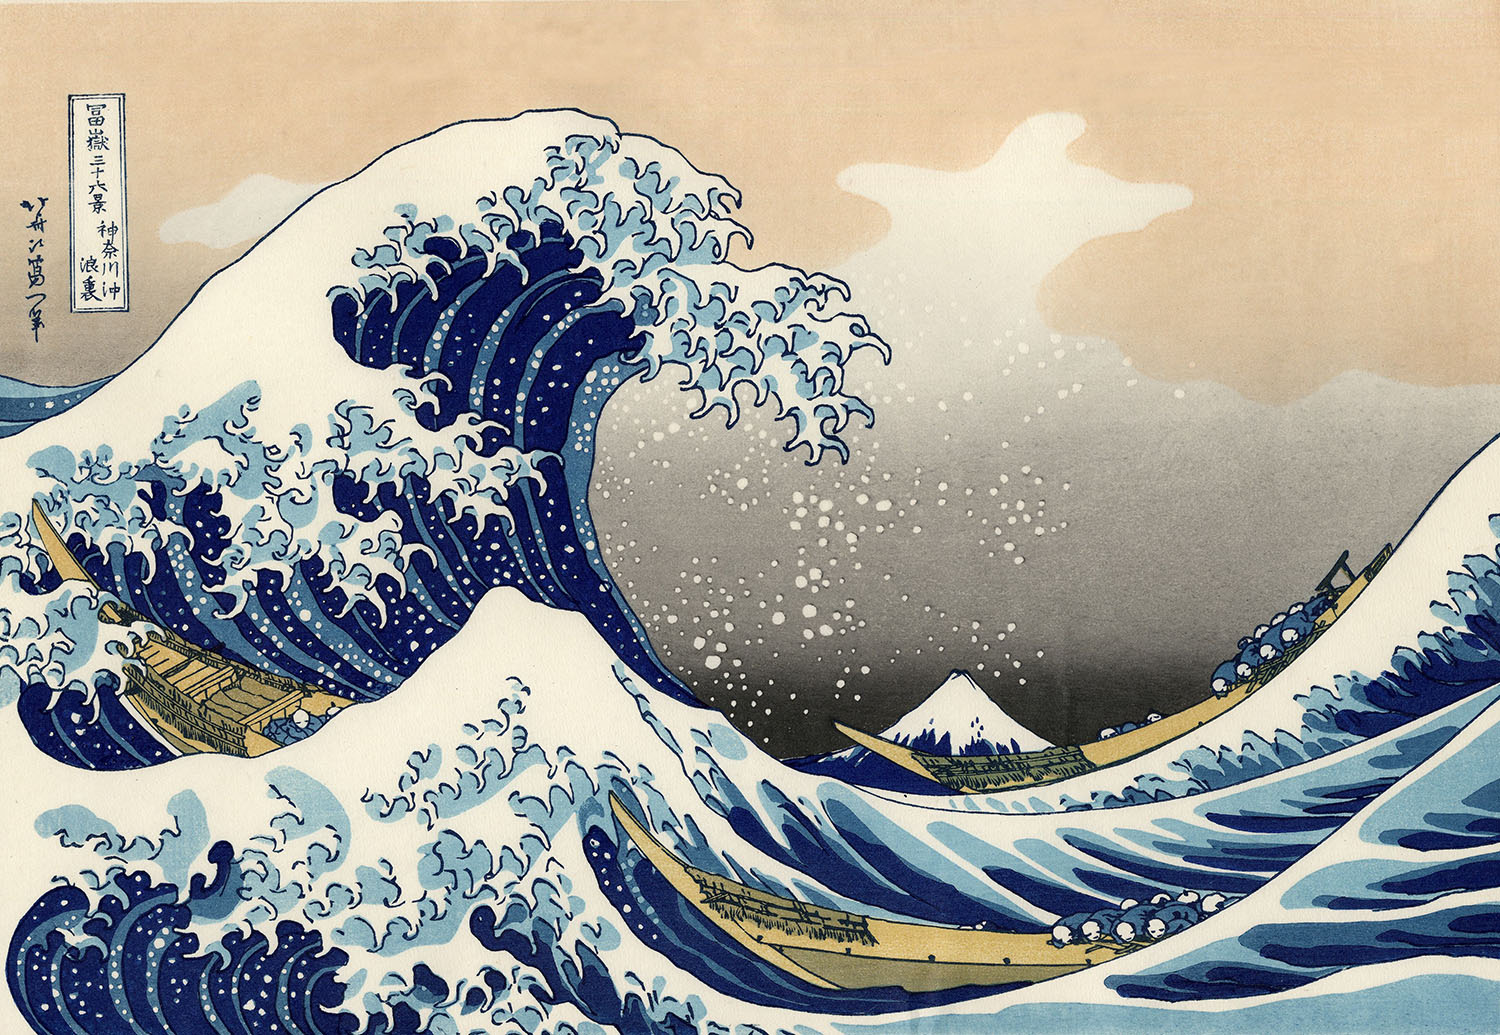 The Great Wave, 1833